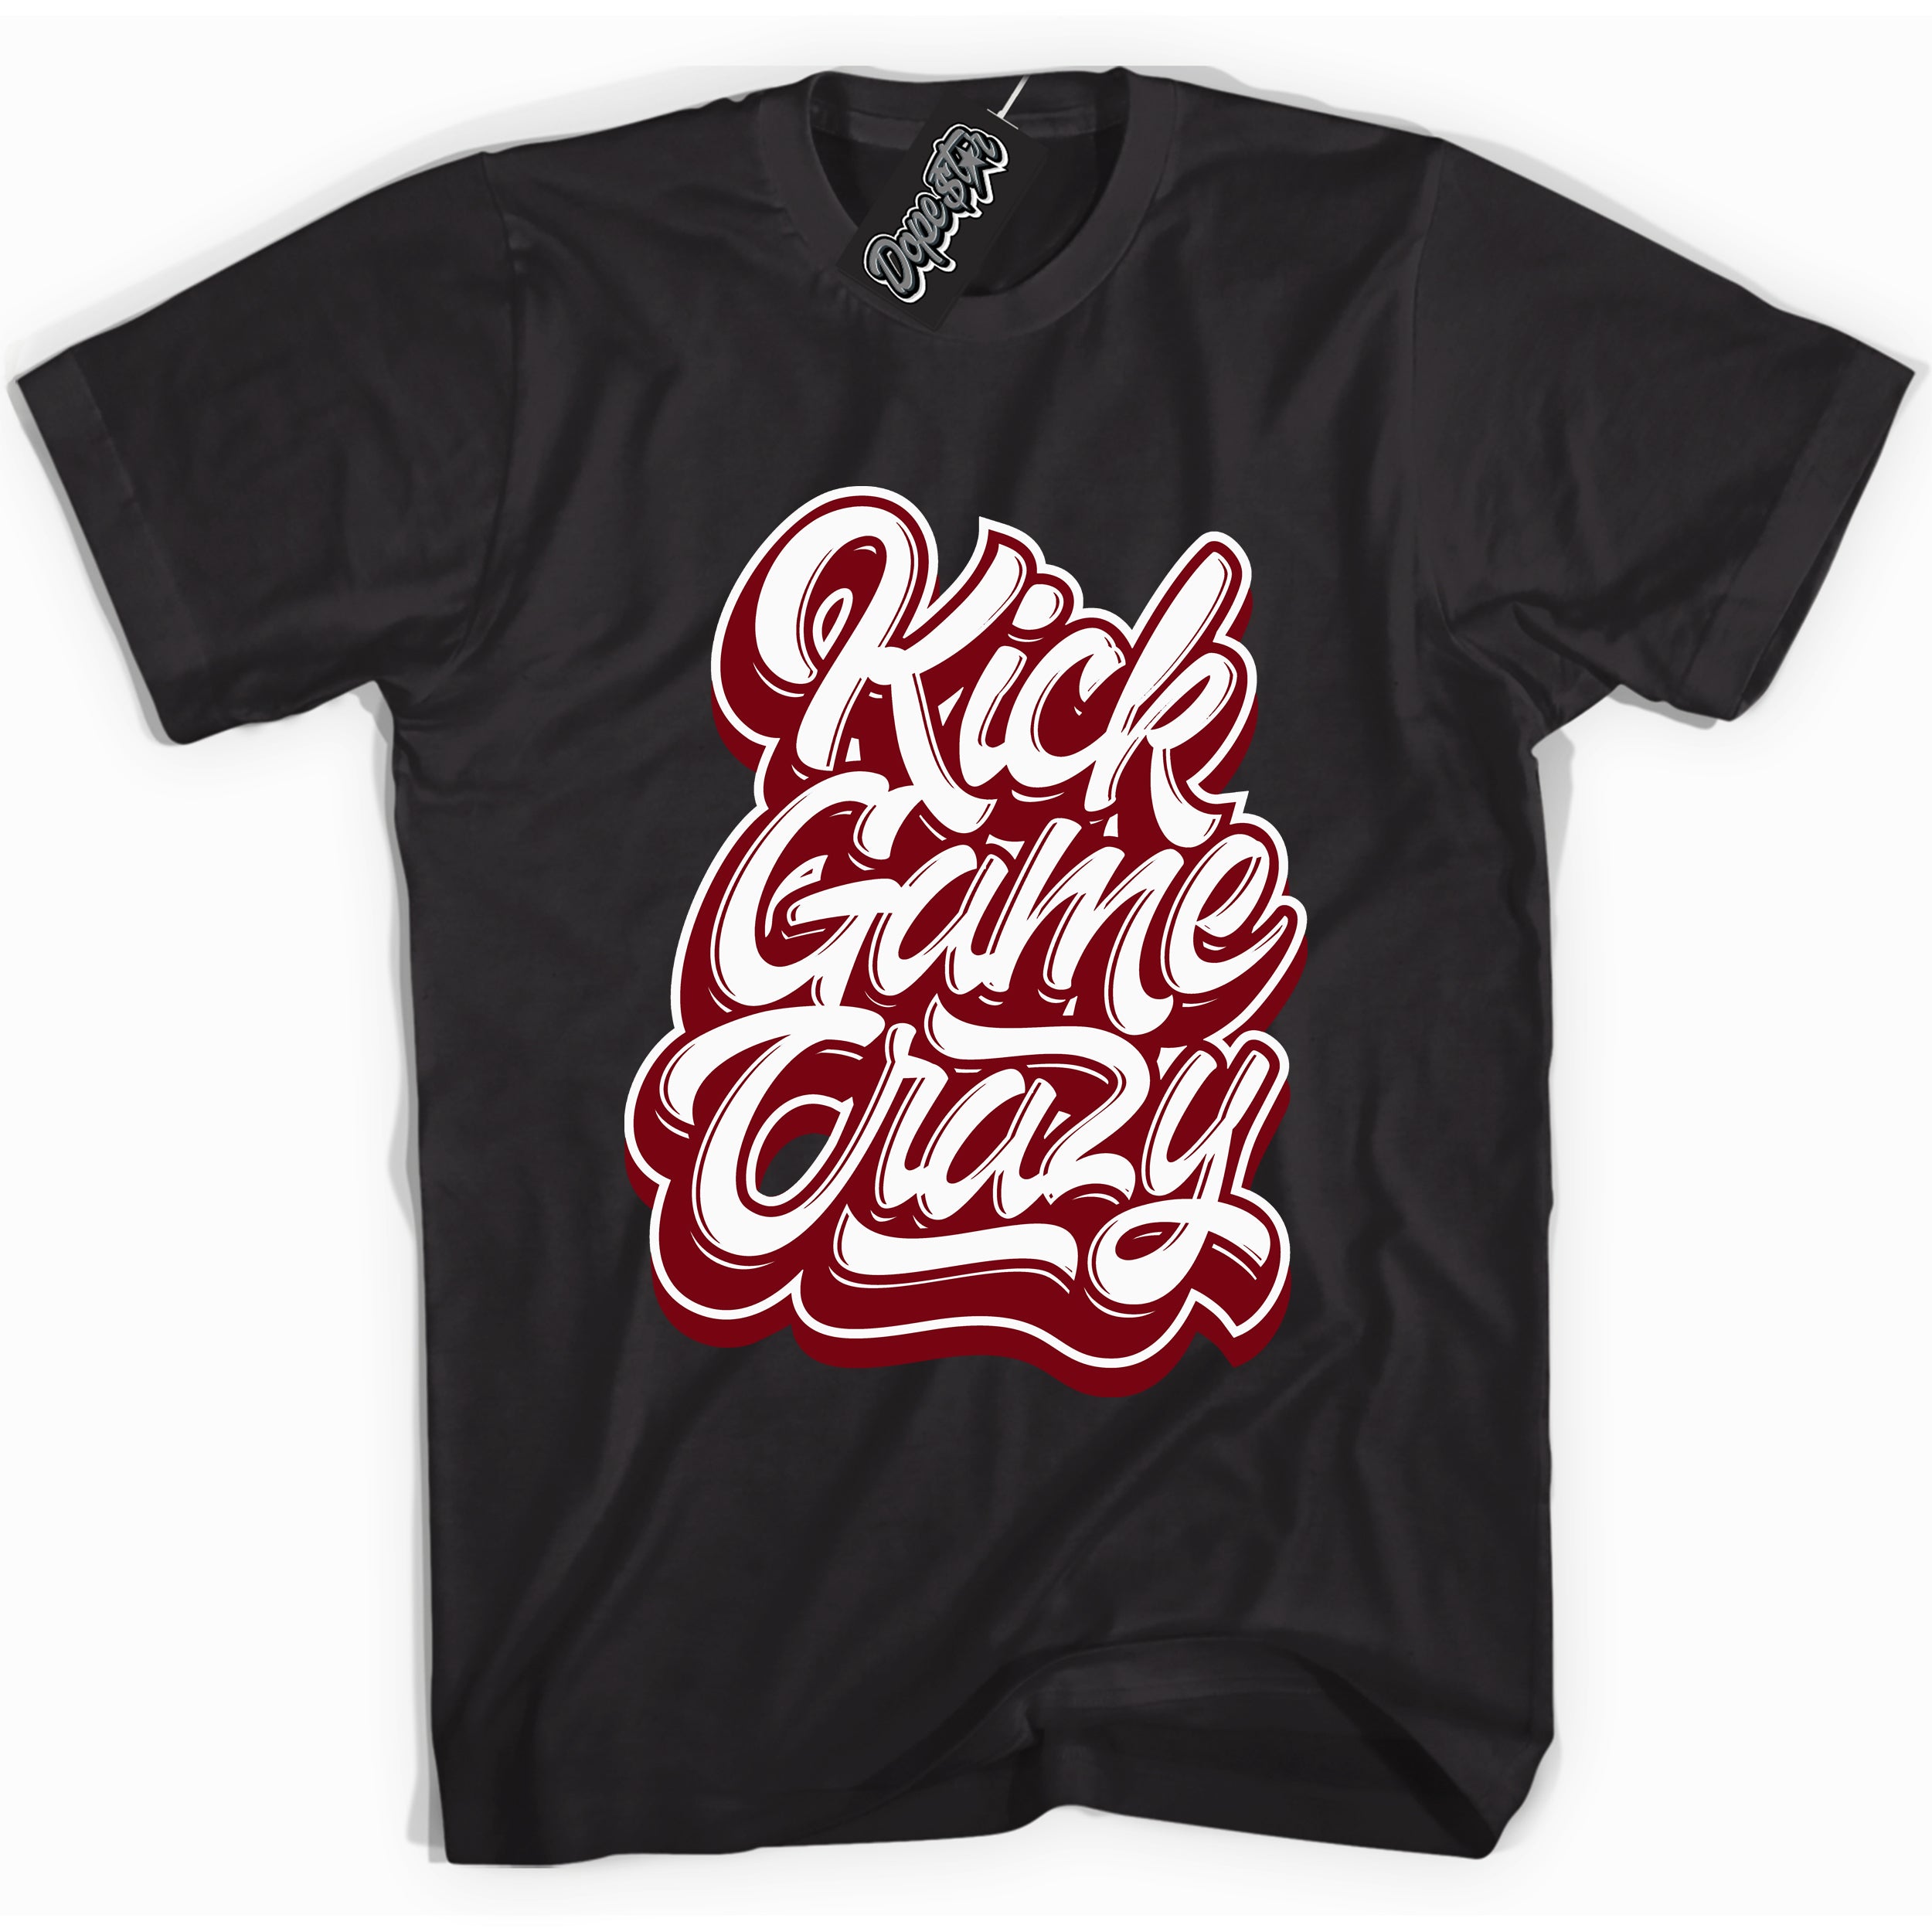 Cool Black graphic tee with “ Kick Game Crazy ” print, that perfectly matches OG Metallic Burgundy 1s sneakers 